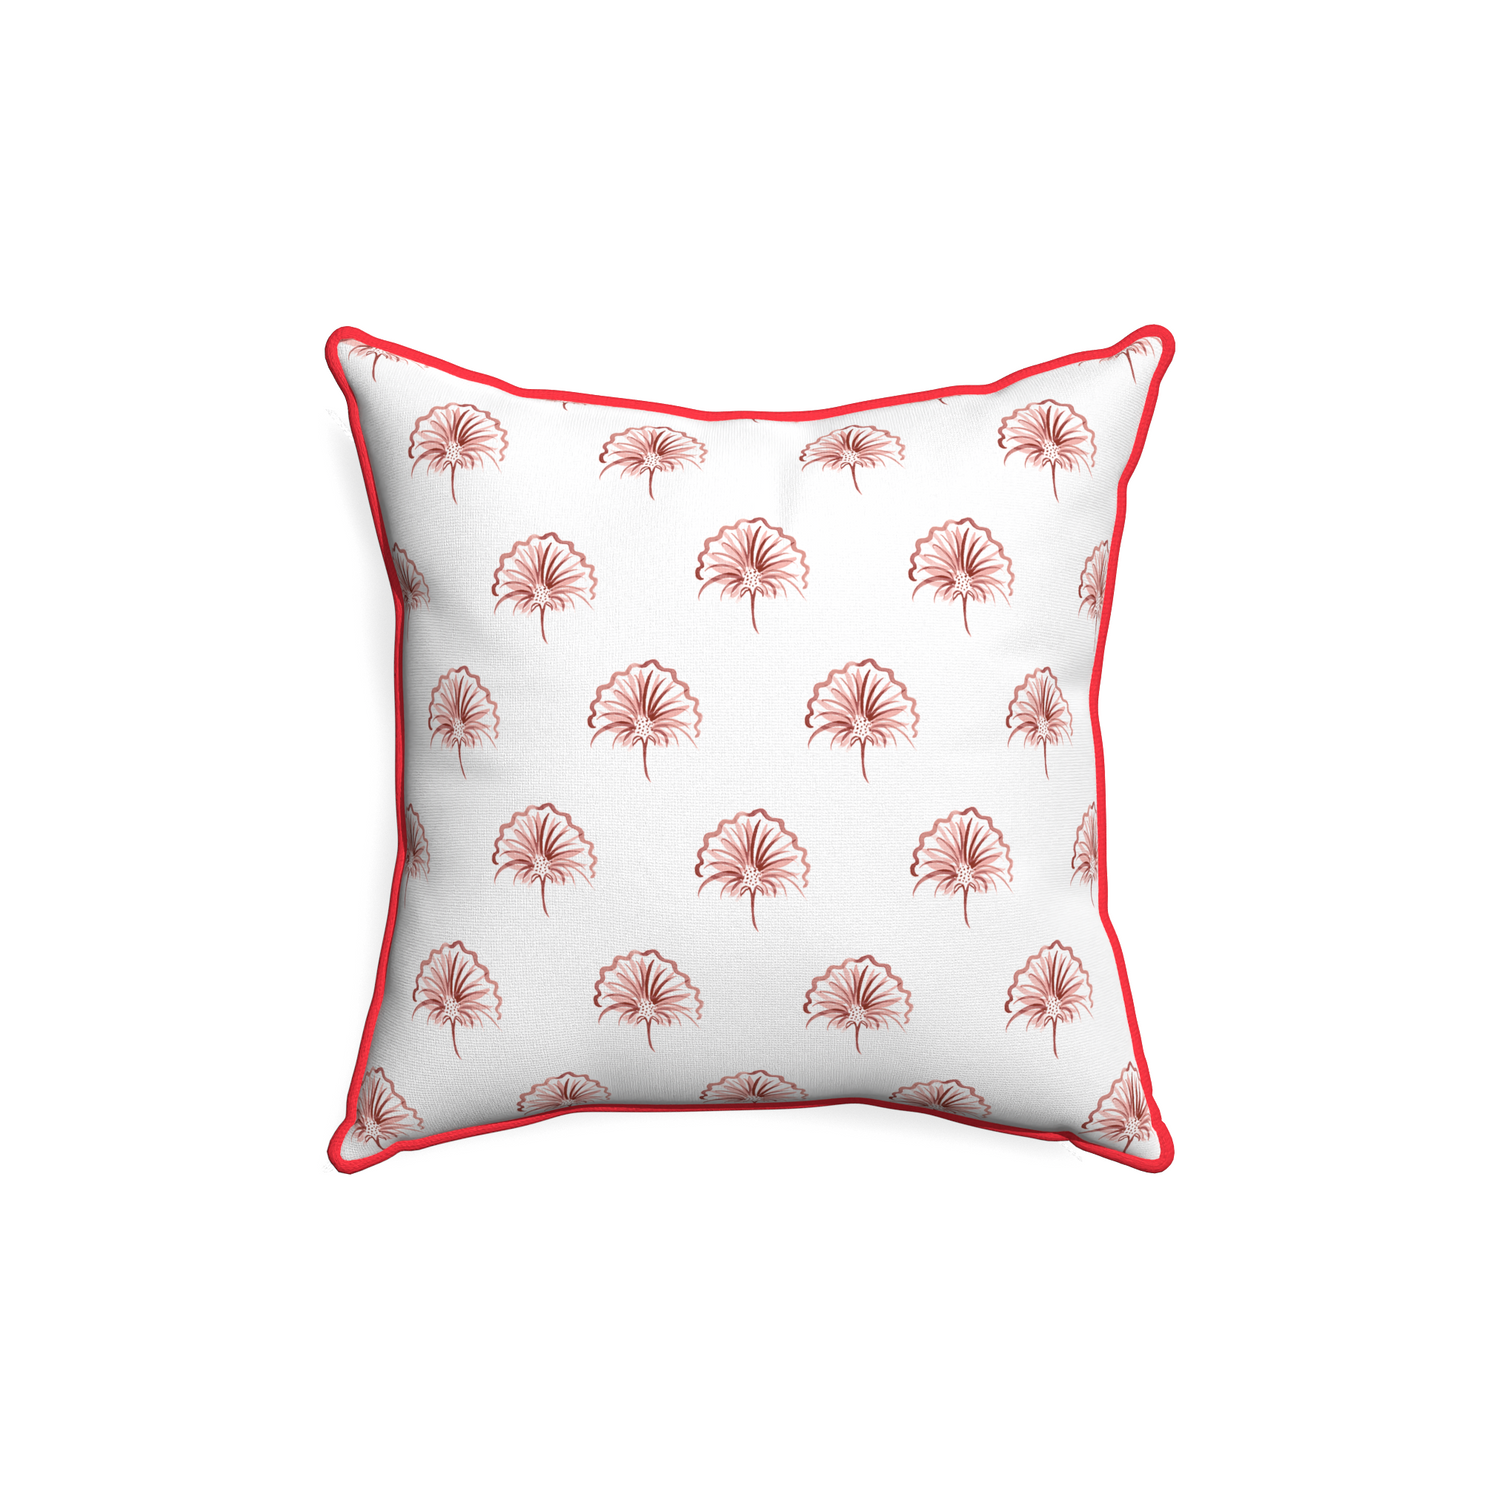 18-square penelope rose custom floral pinkpillow with cherry piping on white background